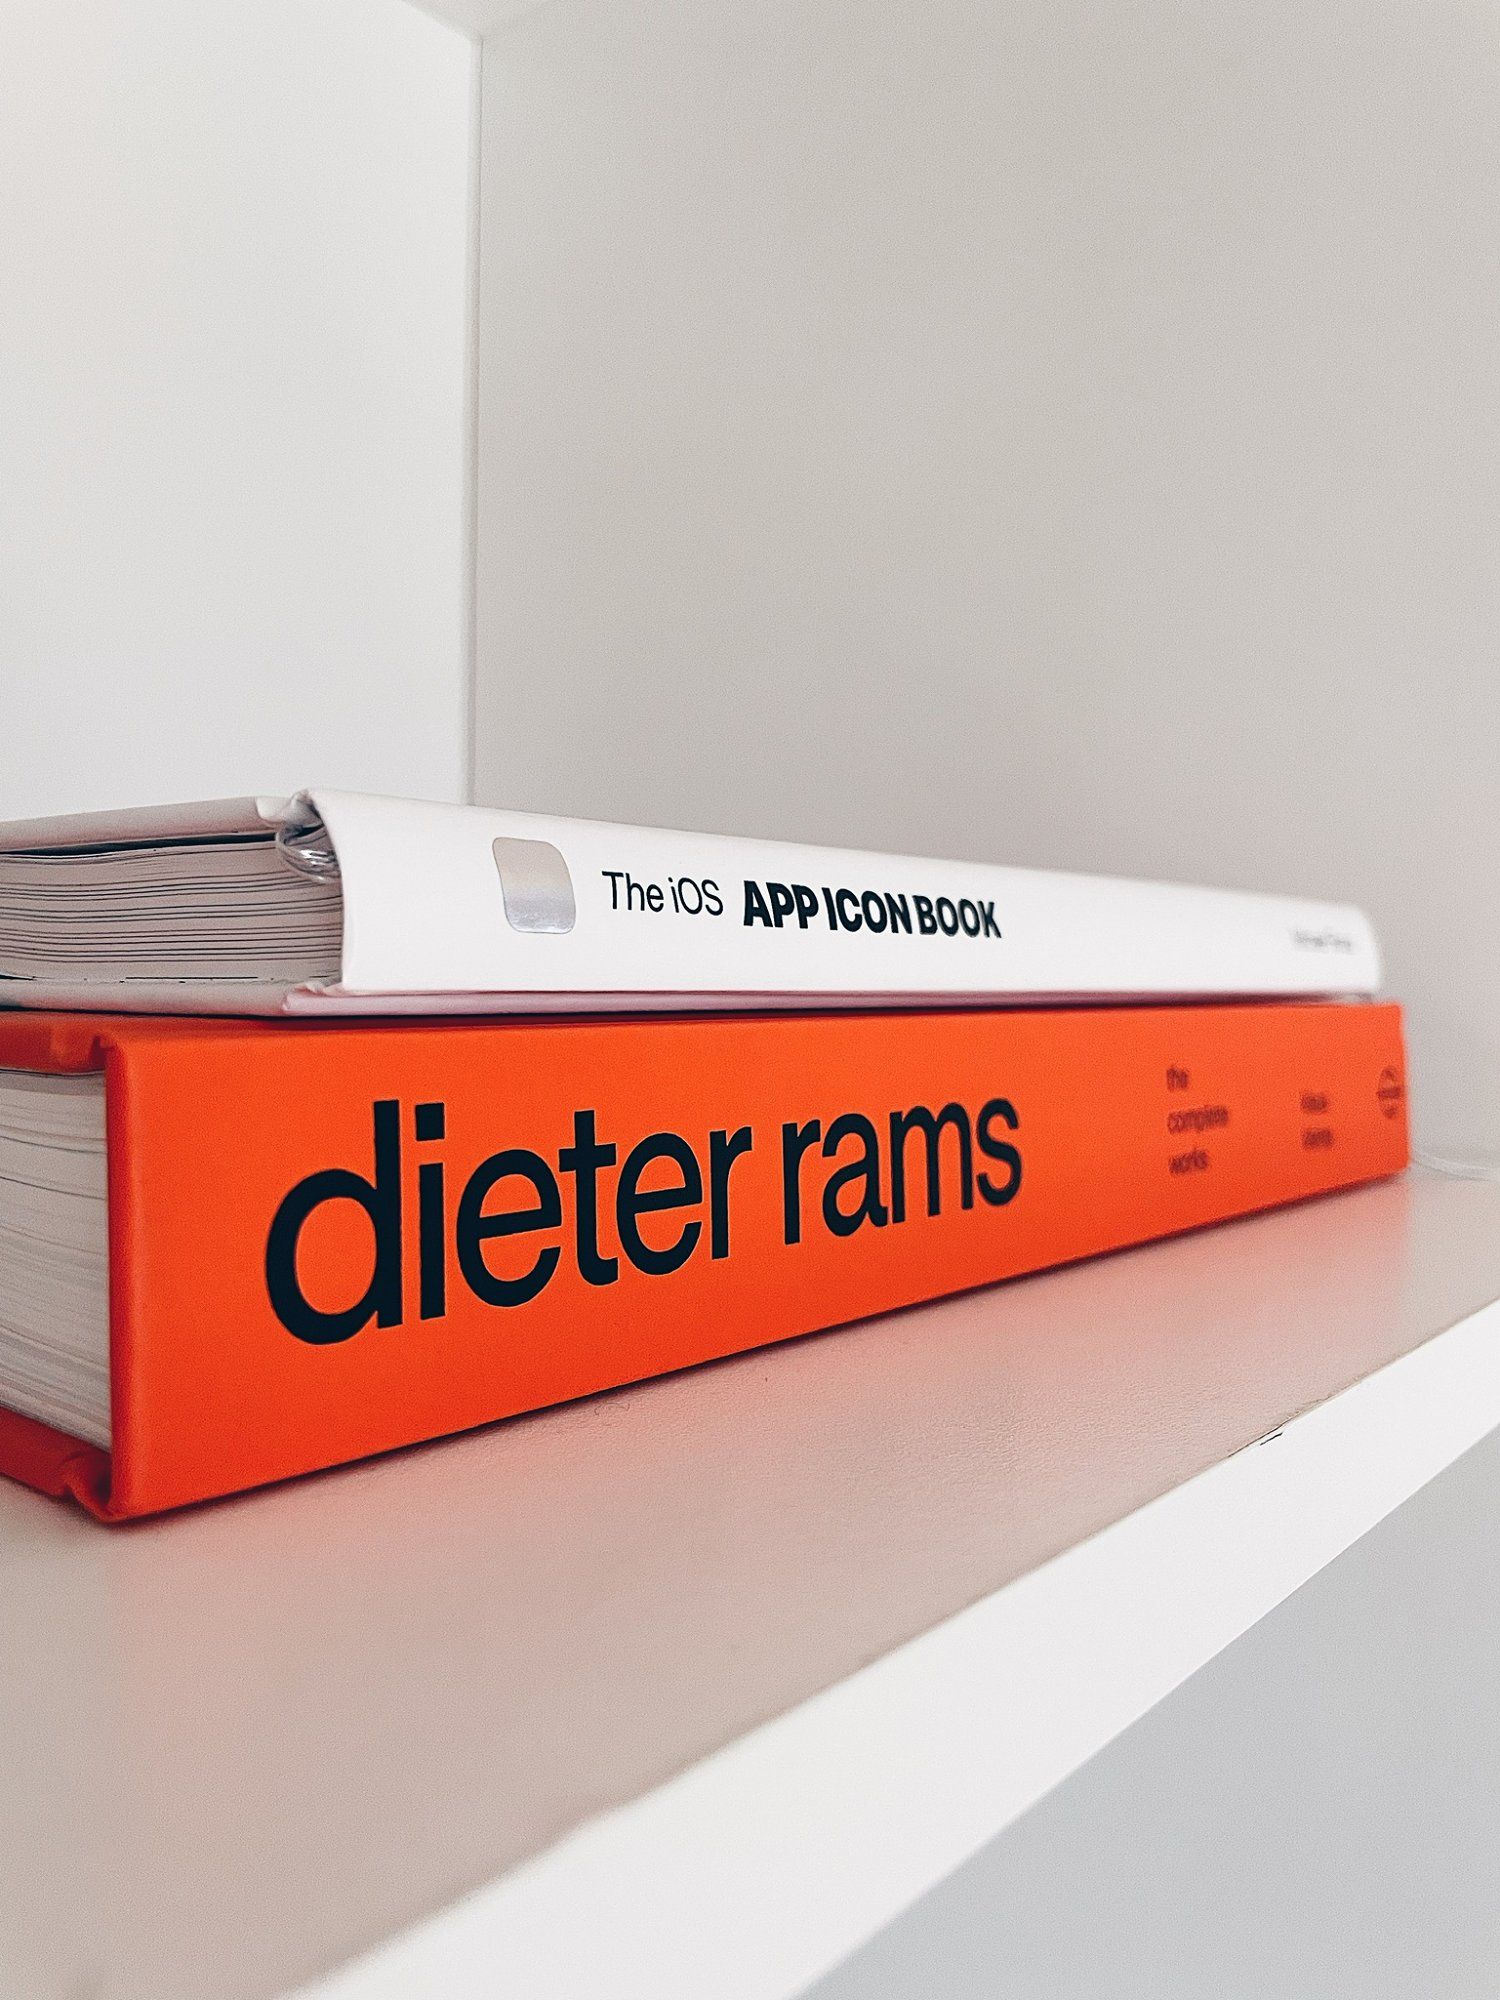 The iOS App Icon Book and a Dieter Rams: The Complete Works reference book